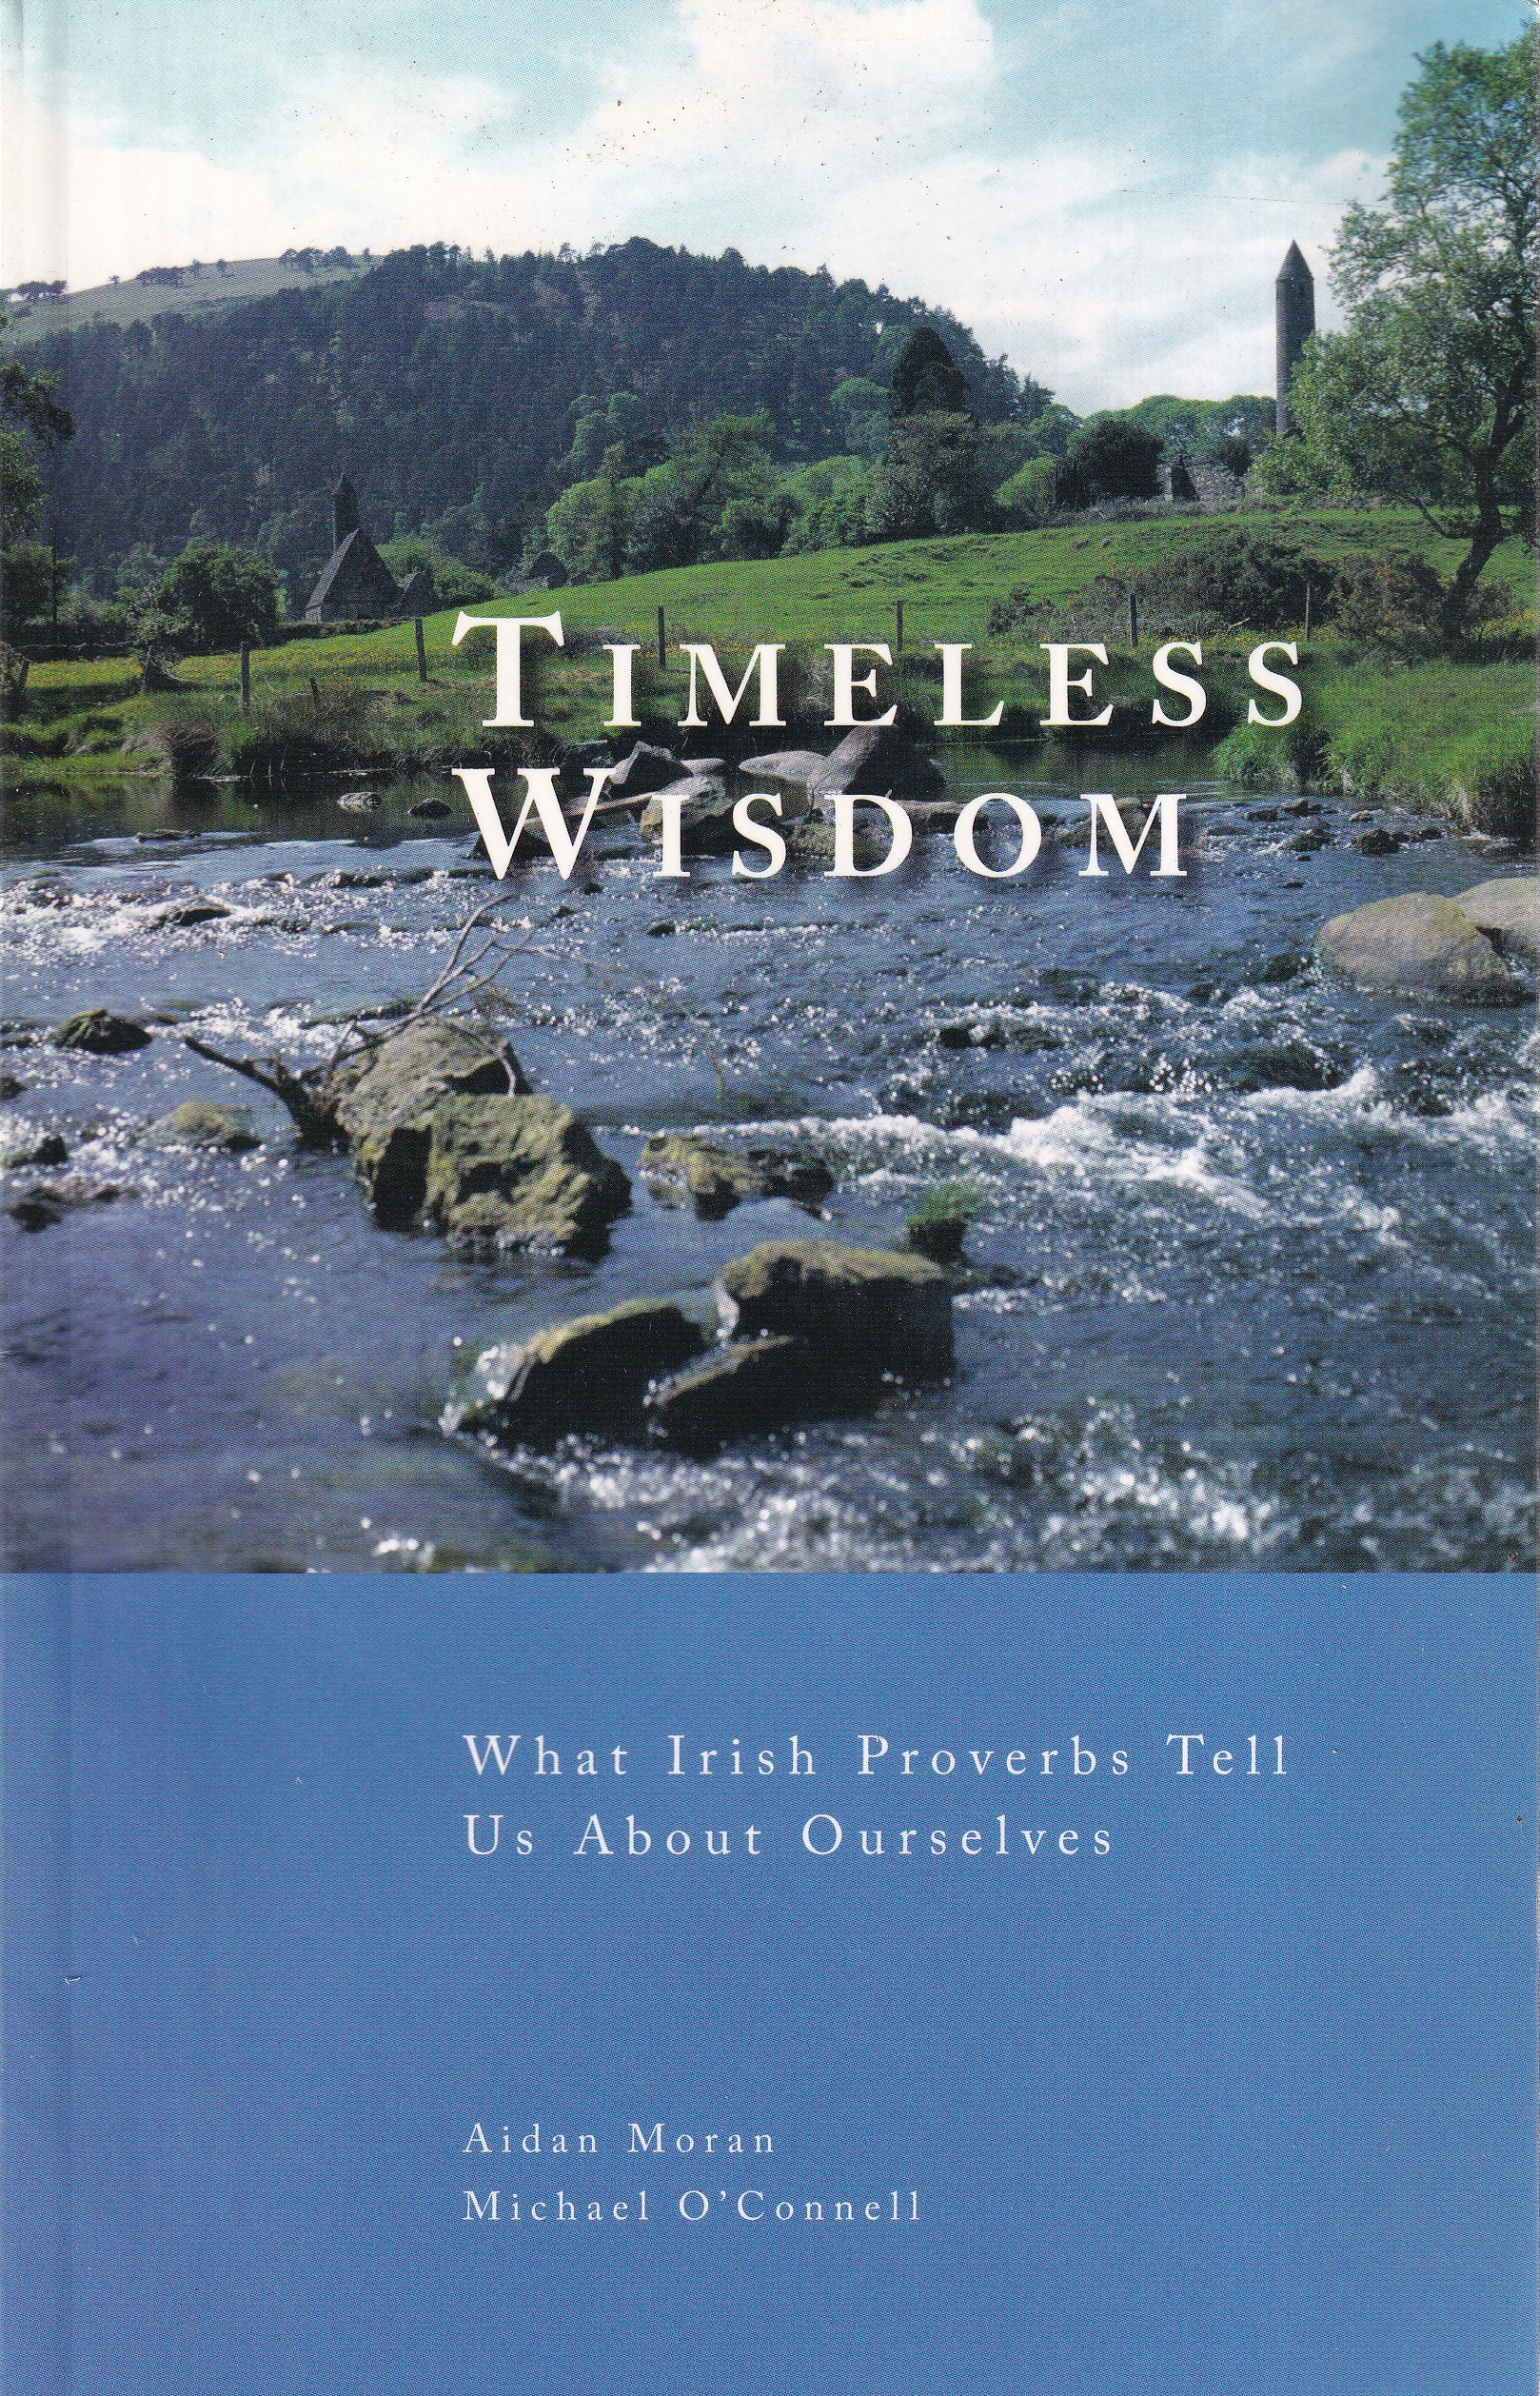 Timeless Wisdom: What Irish Proverbs Tell Us About Ourselves by Aidan Moran and Michael O'Connell